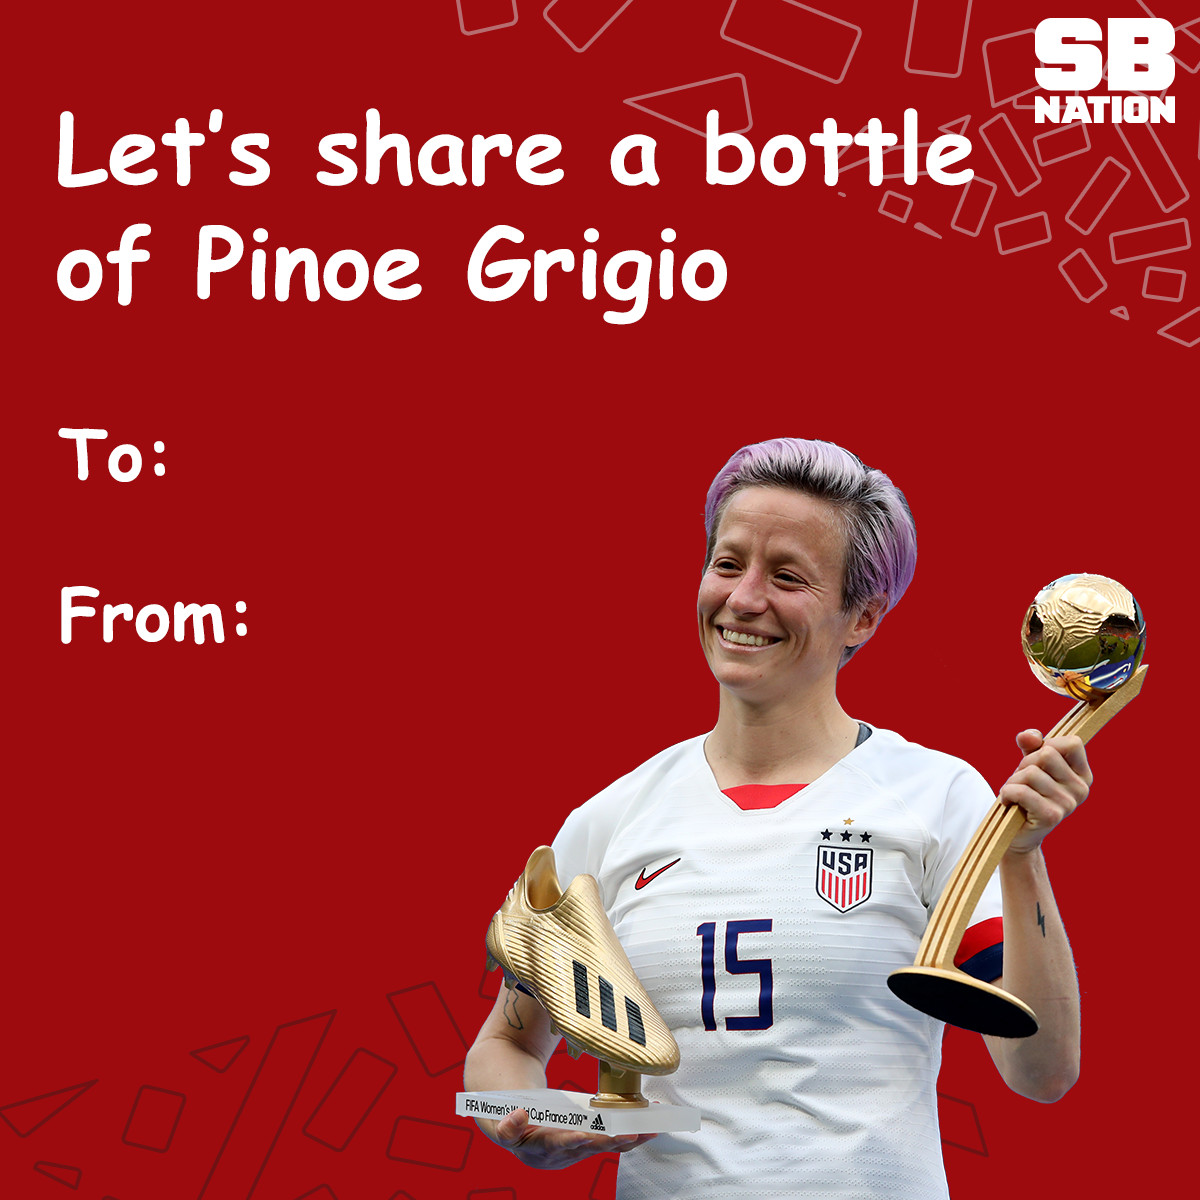 Image of Megan Rapinoe with the text “Let’s share a bottle of Pinoe Grigio”